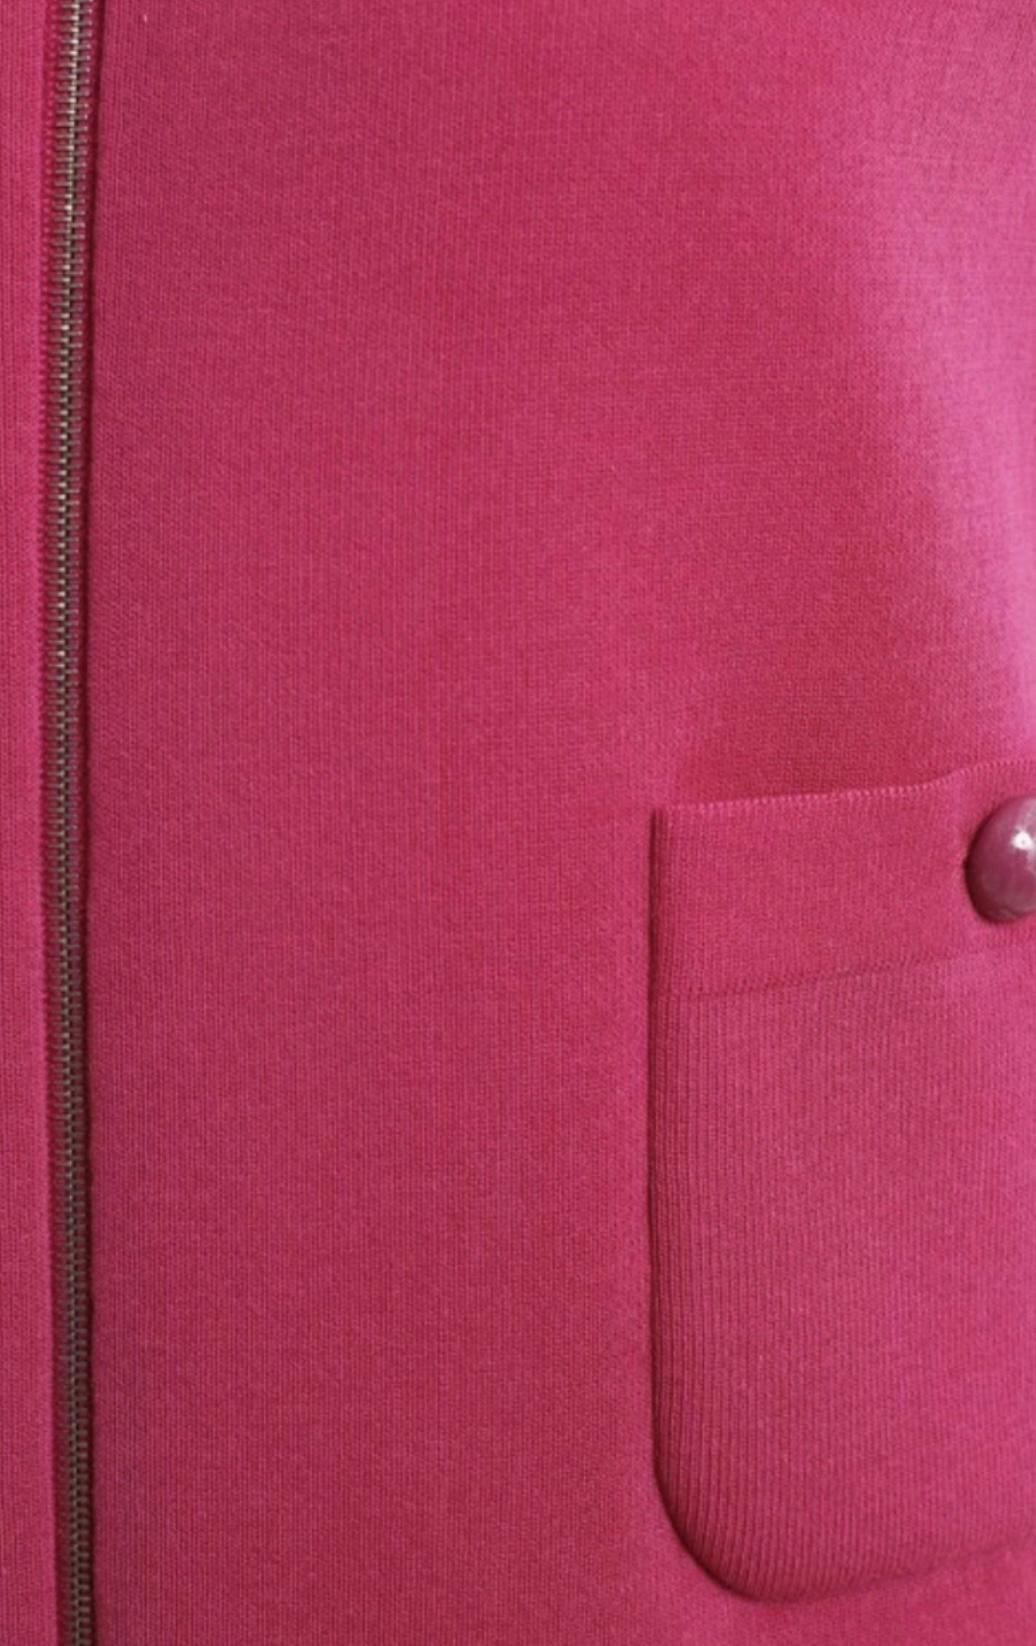 Chanel Stylish Fuchsia Dress with CC Buttons For Sale 1